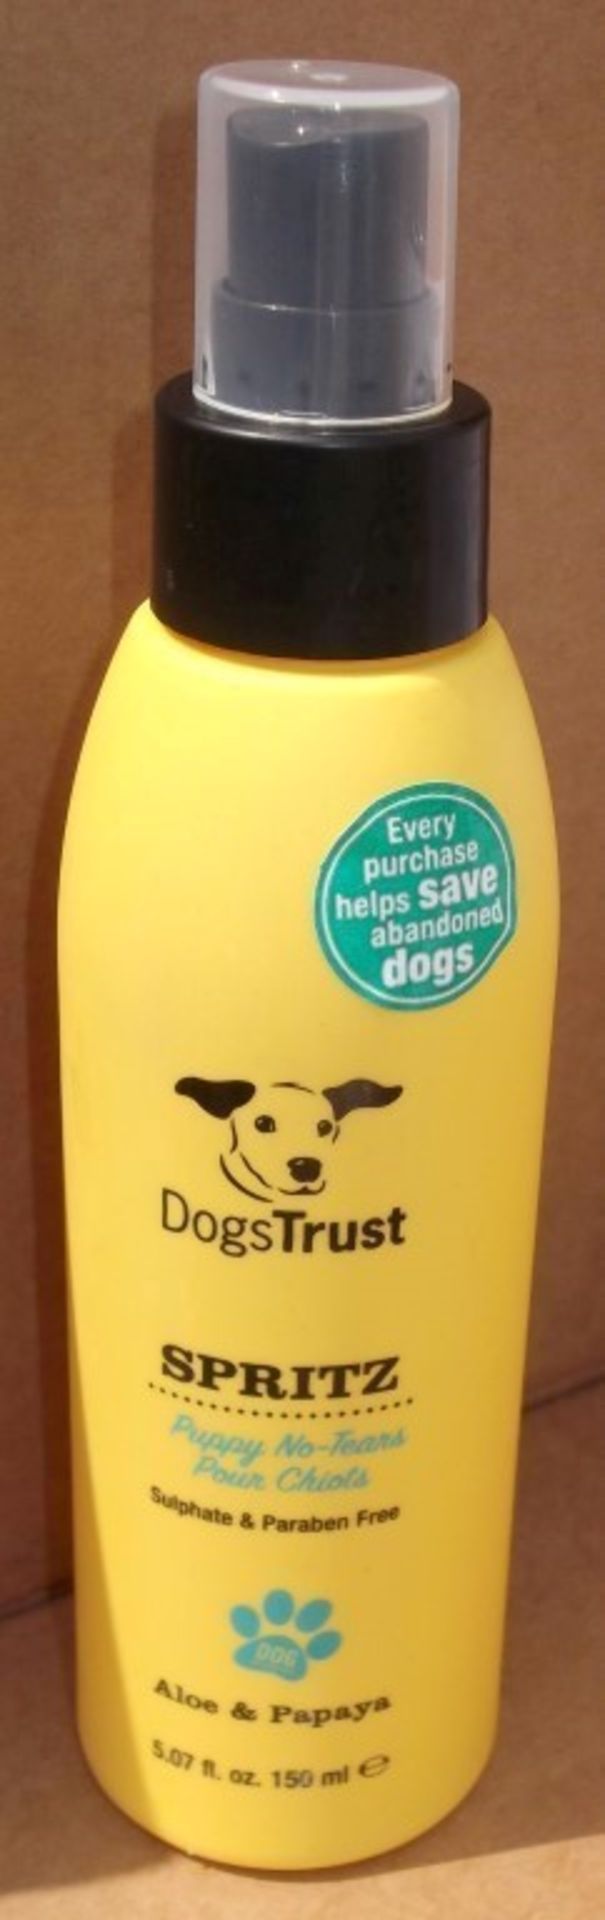 60 x Various Dogs Trust Shampoos and Conditioners - Brand New Stock - CL028 - Includes No Tears, - Image 8 of 15